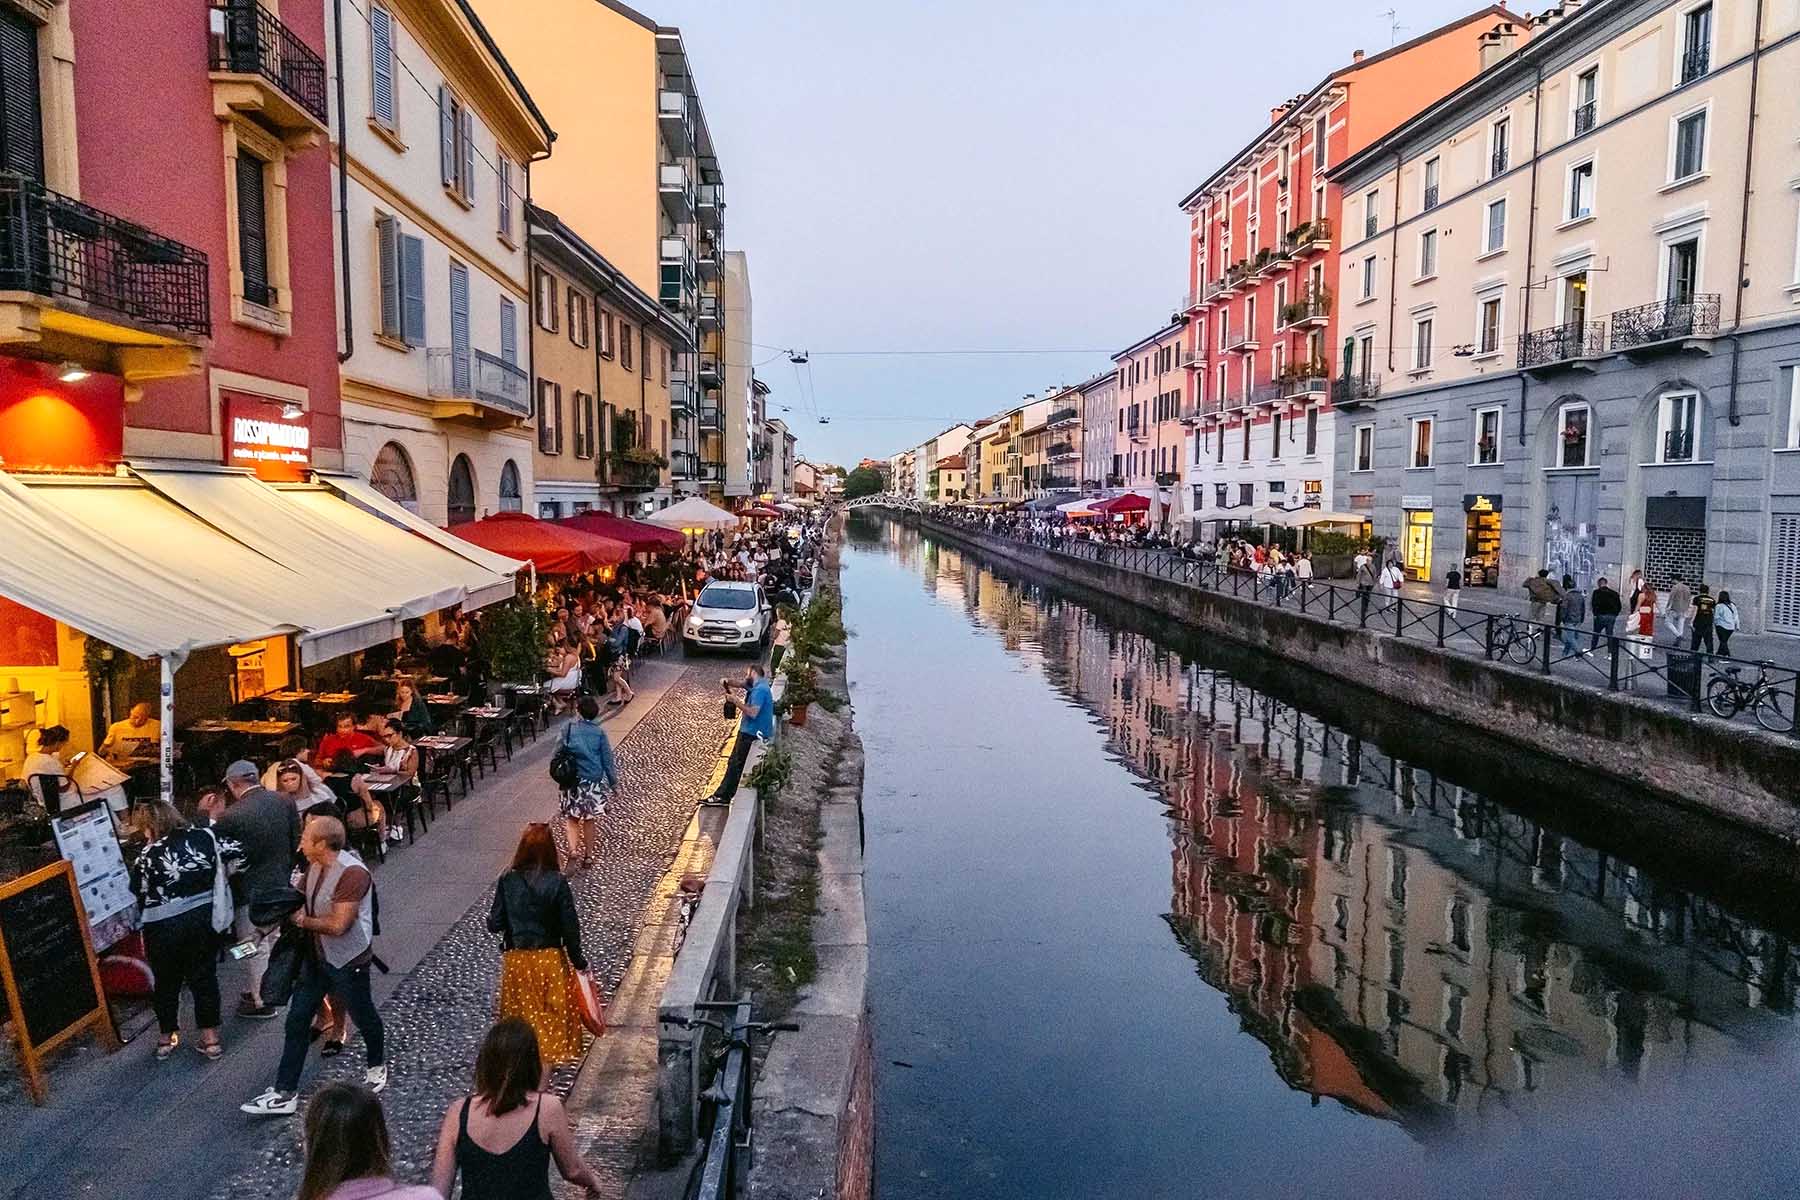 People walking by a canal during the early evening in Navigli, Milan